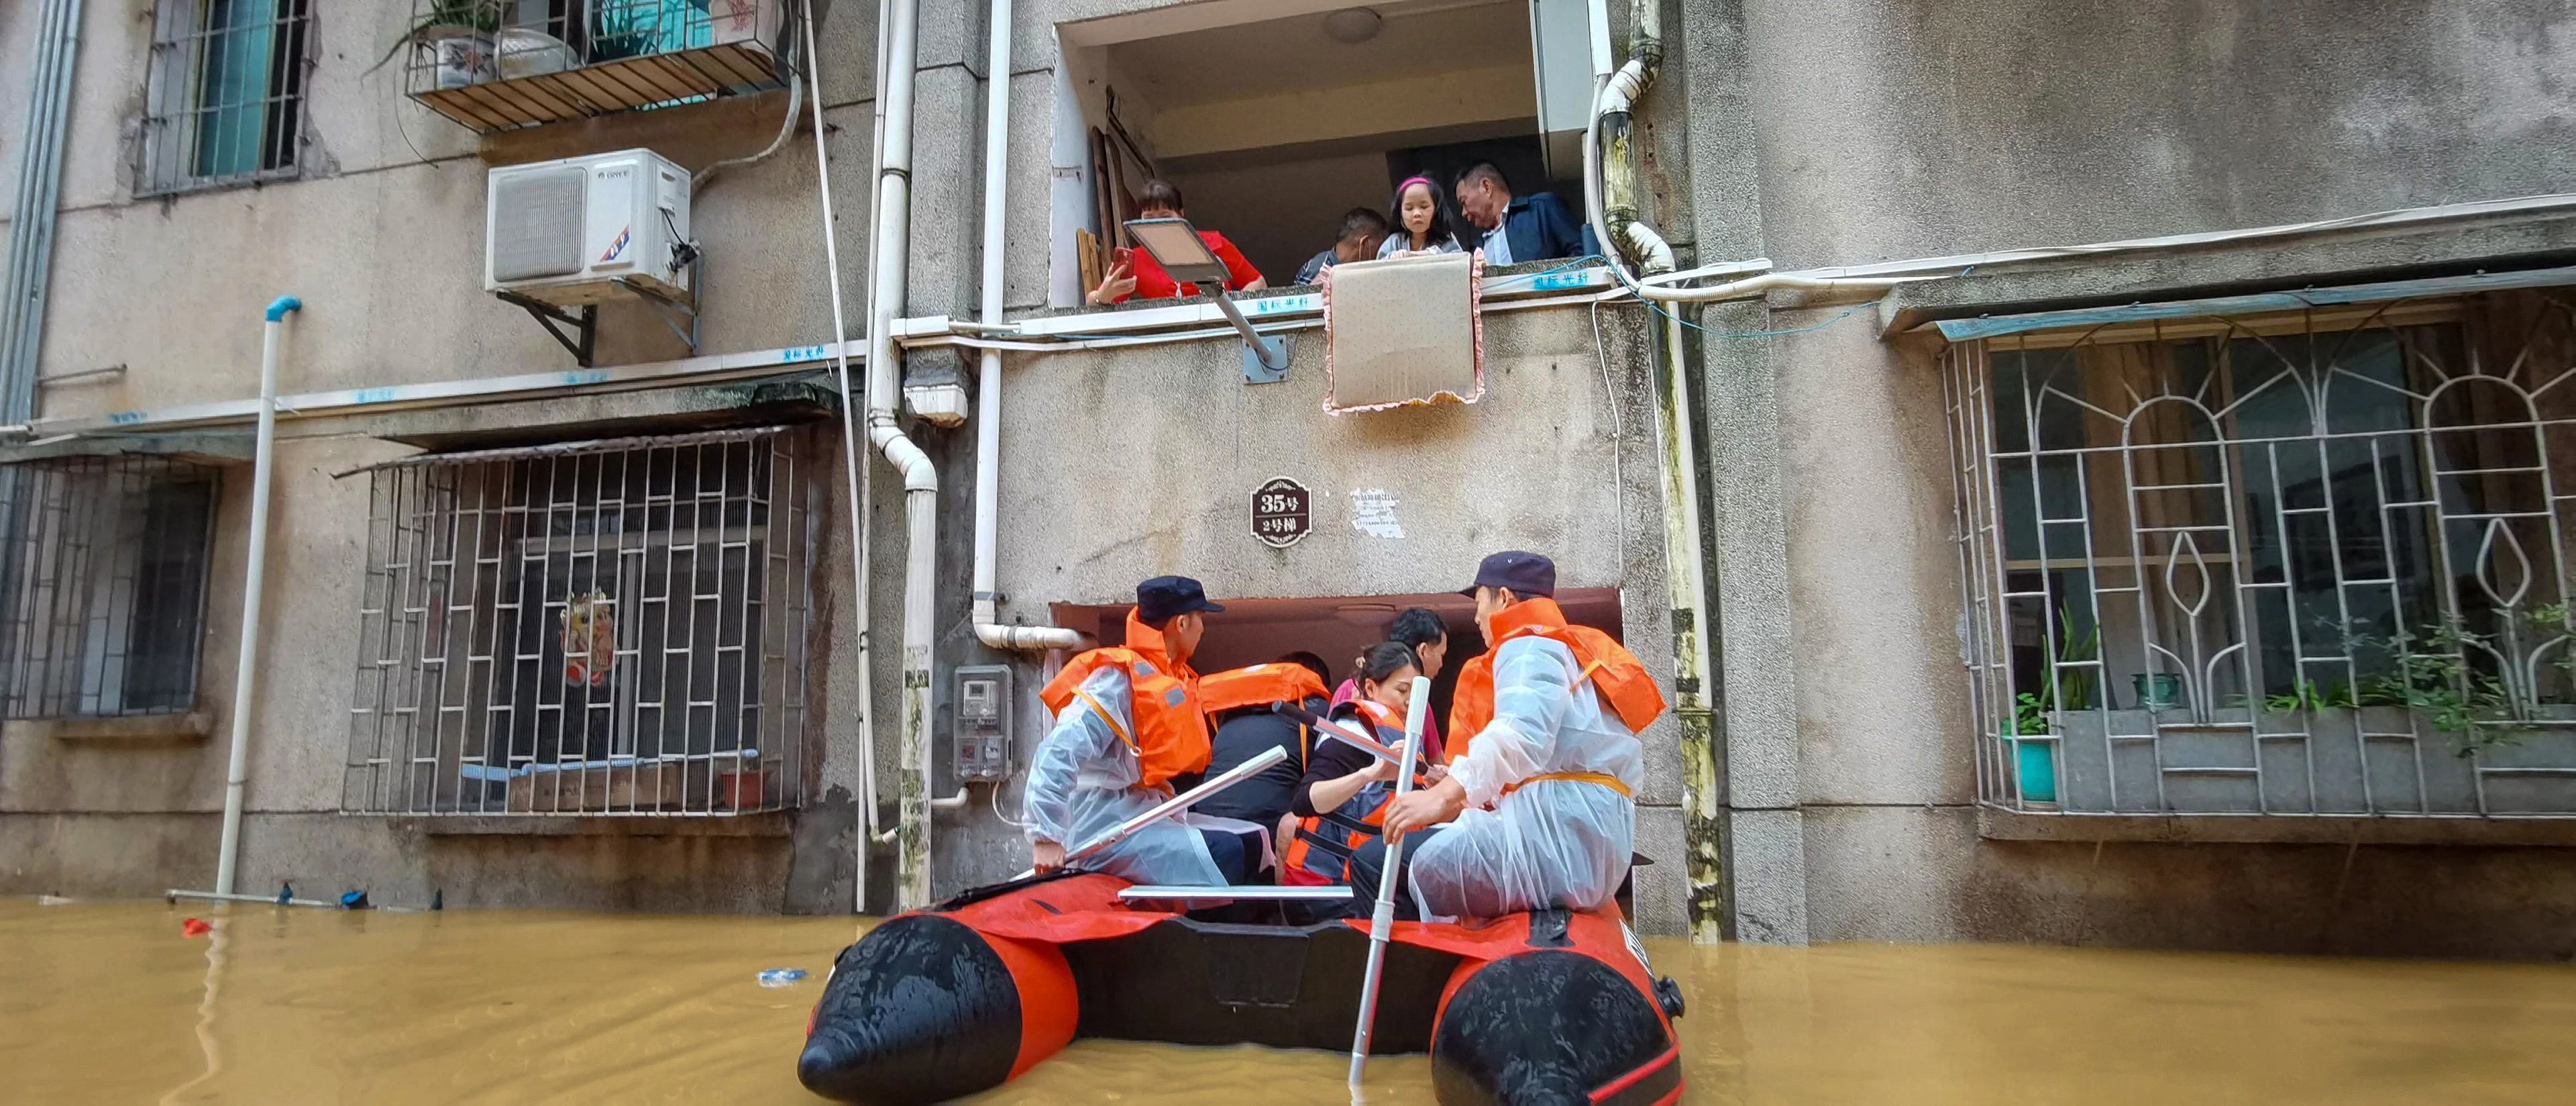 Shaoguan emergency workers help stranded residents evacuate their home on Saturday. Photo: Xinhua